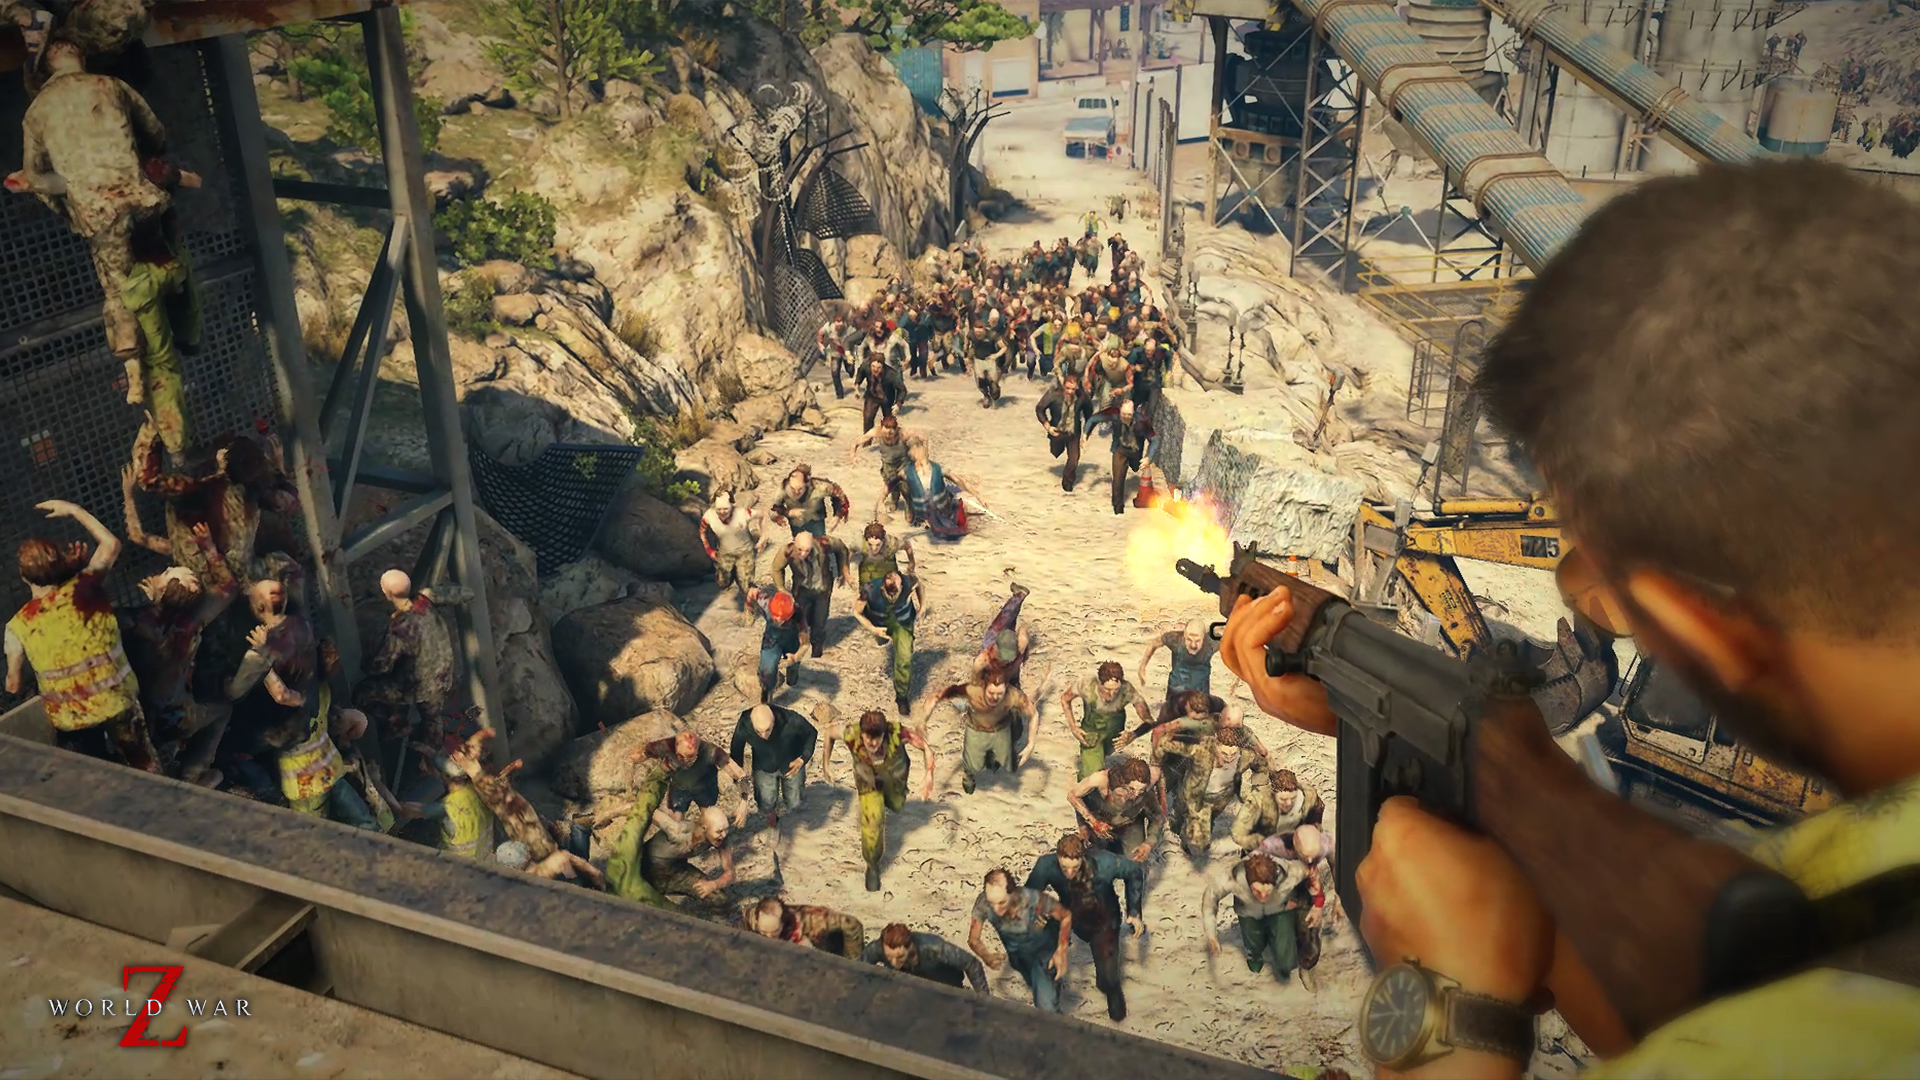 World War Z – Introducing: The Horde